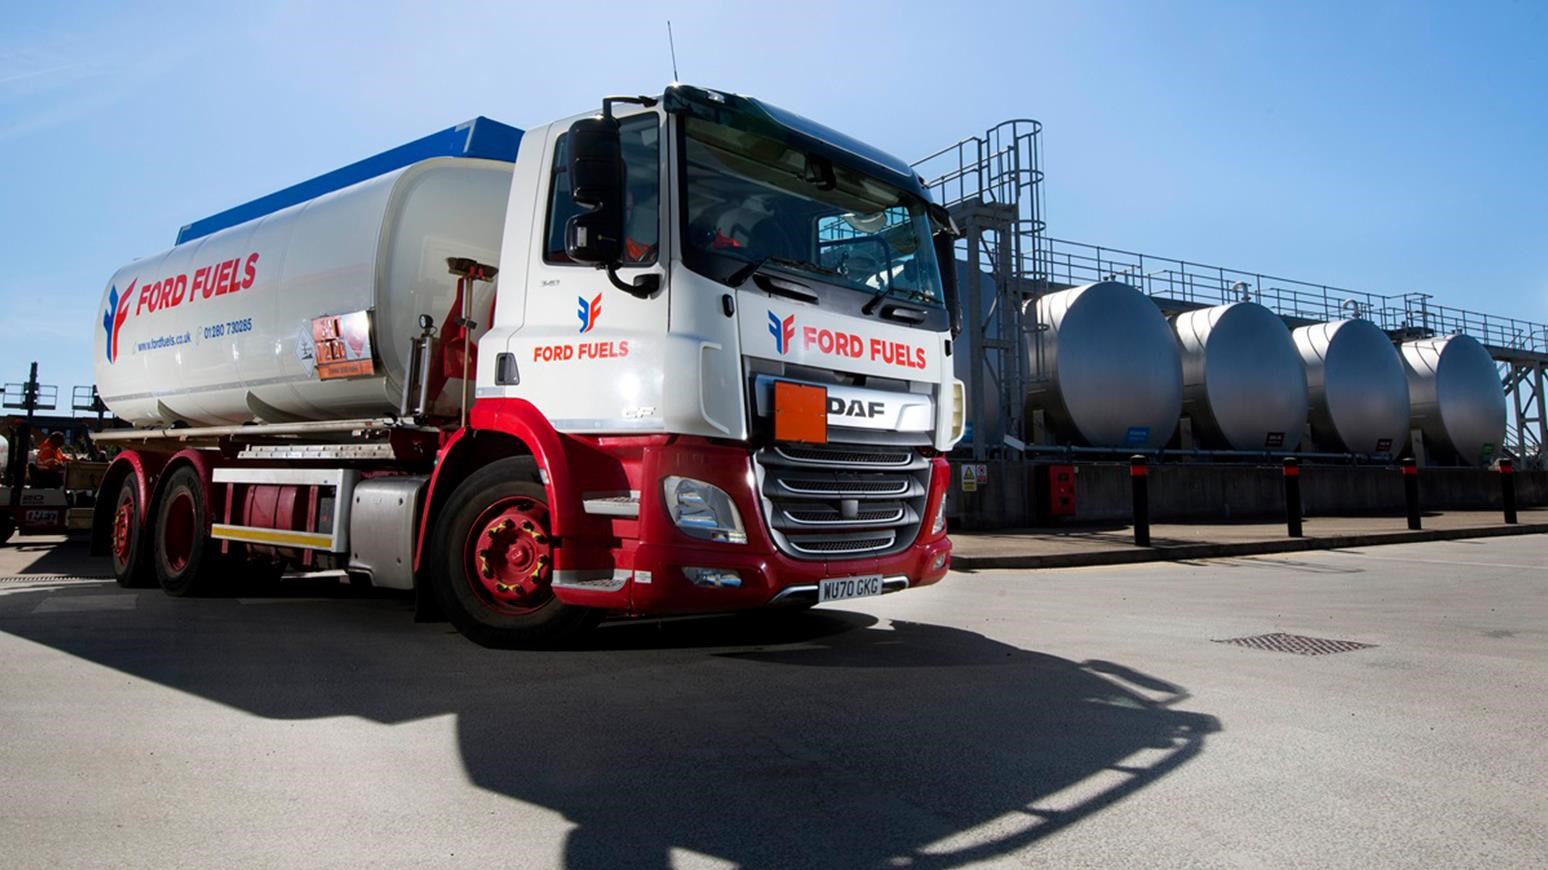 Ford Fuels Tops-Up With DAF Trucks